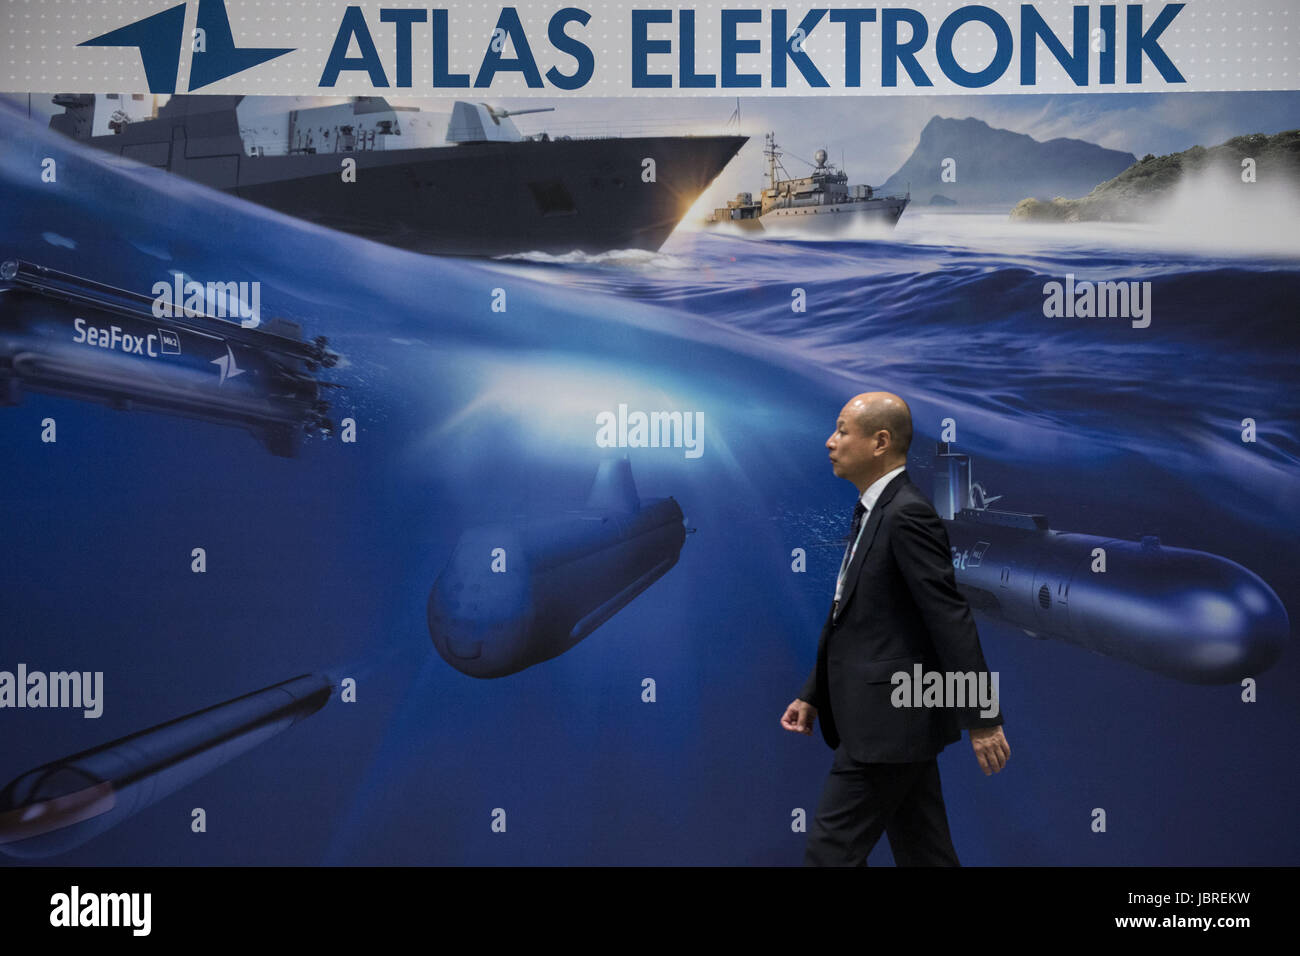 June 12, 2017 - Chiba, Chiba, Japan - A man passes in front of an image of Atlas Elektronik stand during the MAST Asia 2017 (Maritime Security between Asia-Pacific, Europe, and Americas) defense exhibition and conference in Chiba, Japan. According to its organisers, the biennial high technology defence industry fair, designed for the defence, security, maritime, air and space industries, is generally thought to be the biggest defence industry fair in the Asia. Regular participants at MAST events represent over 40 countries, from North America, South America, Western and Eastern Europe, Asia an Stock Photo